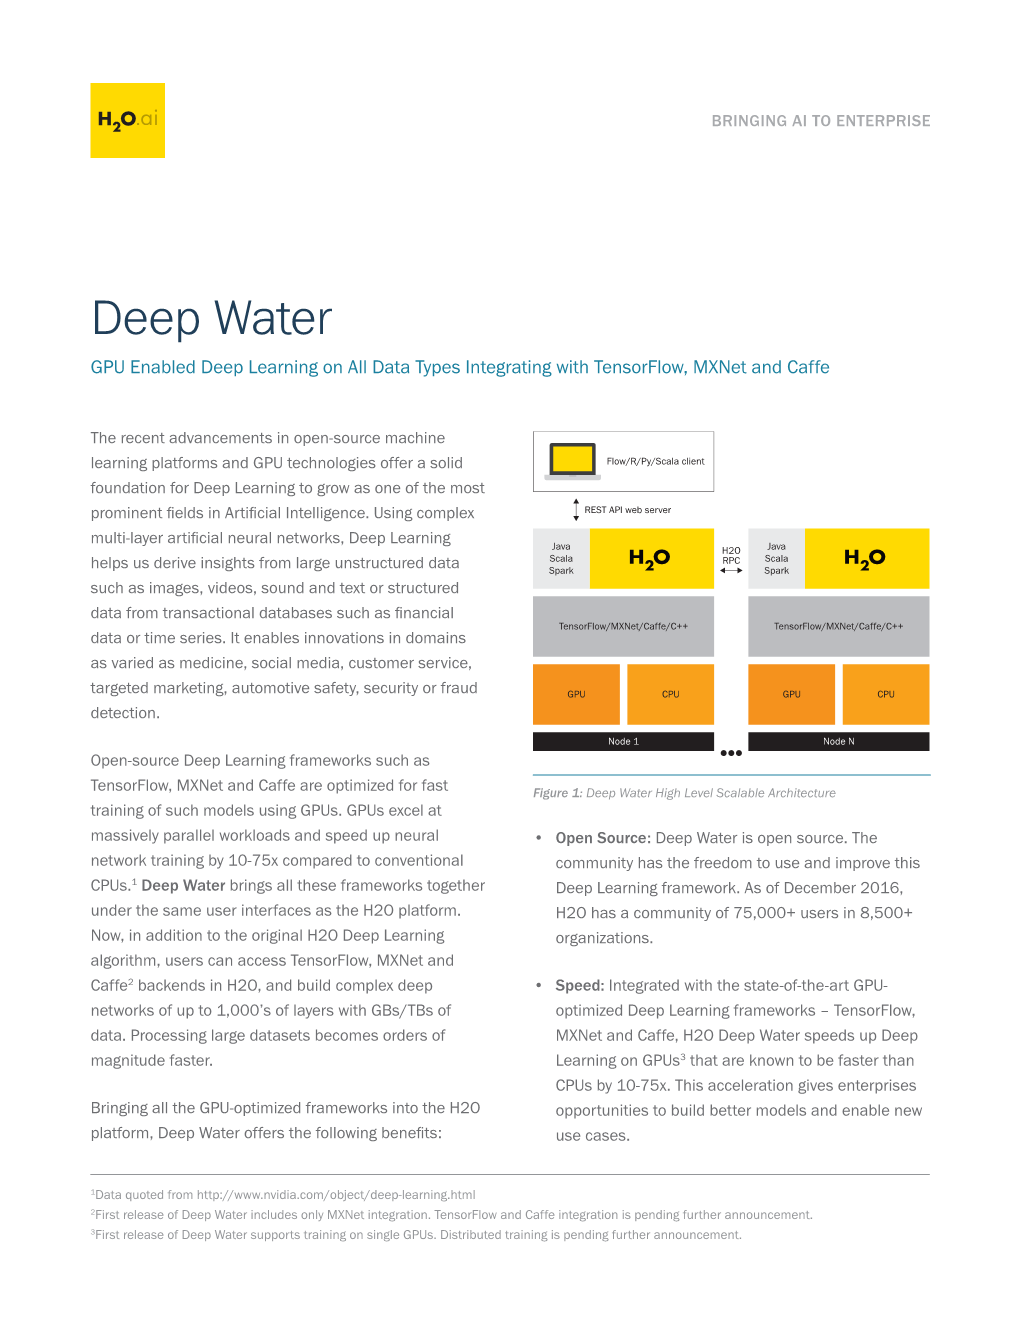 Deep Water GPU Enabled Deep Learning on All Data Types Integrating with Tensorflow, Mxnet and Caffe